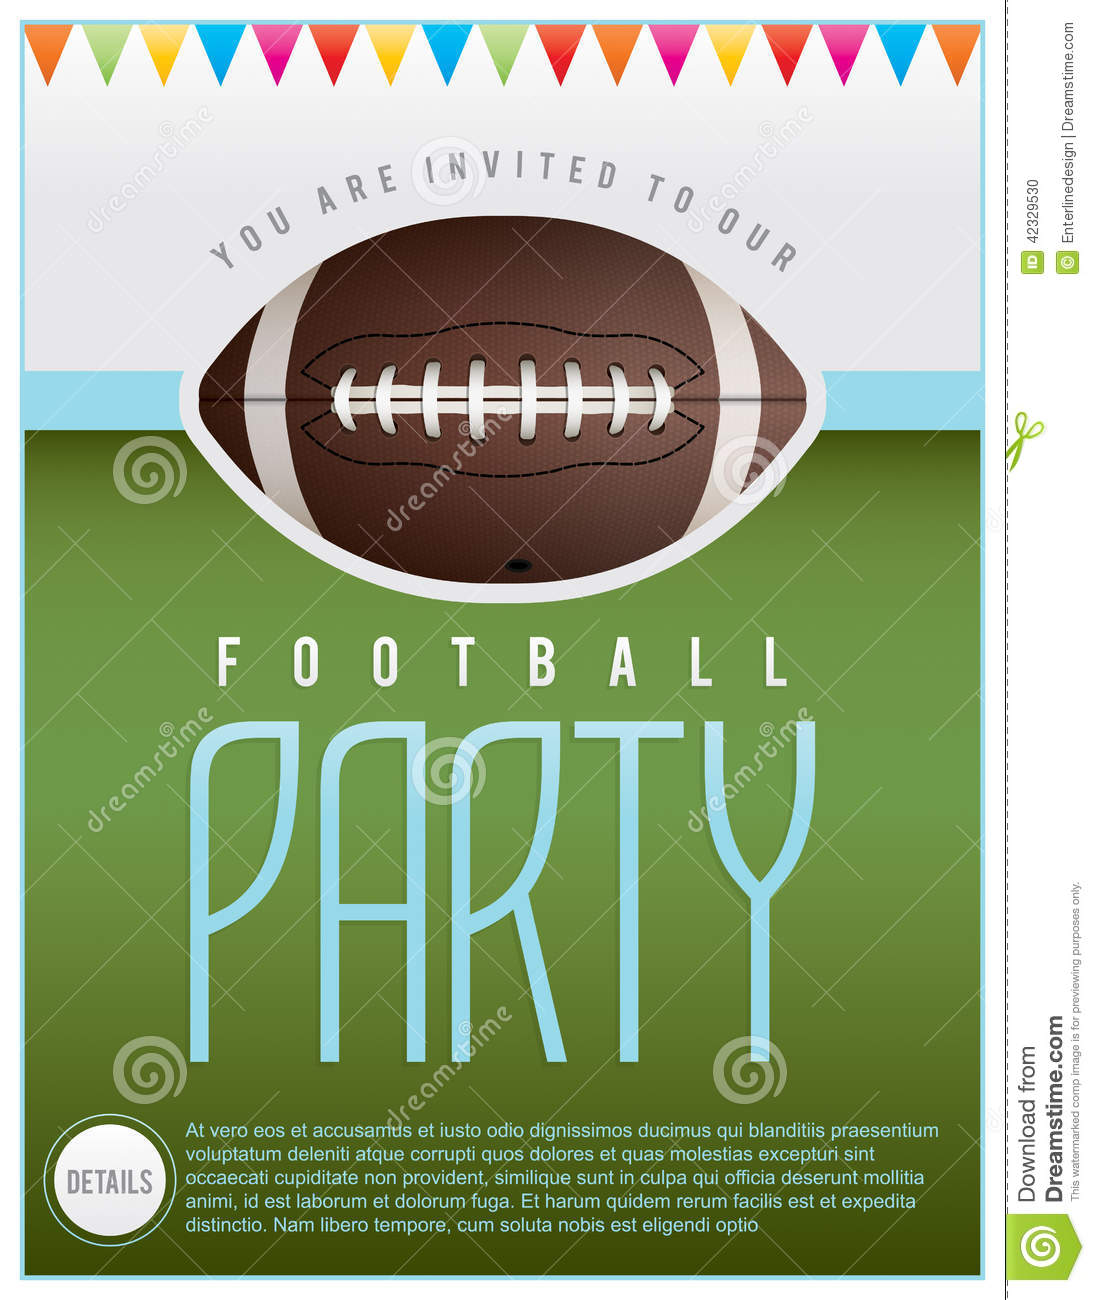 Flyer Design Perfect For Tailgate Parties Football Invites Etc    